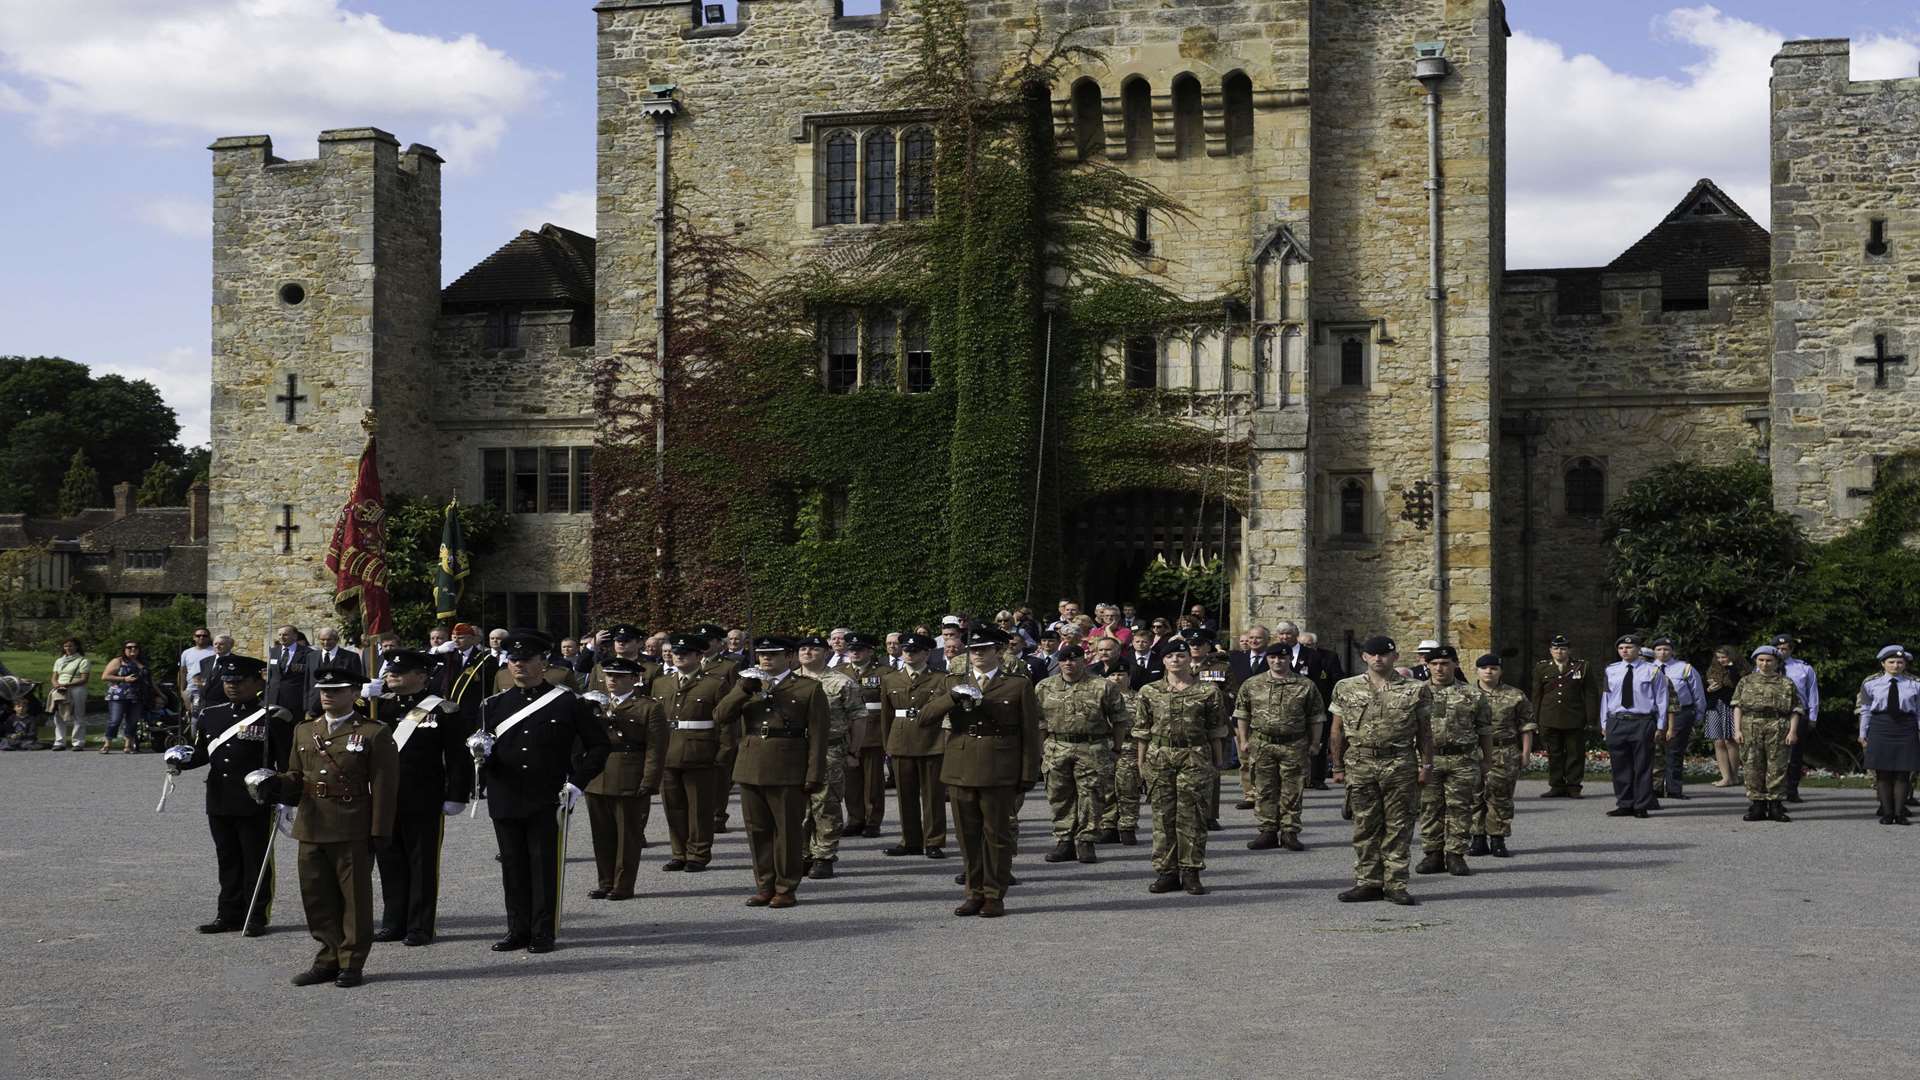 The parade at Hever Castle